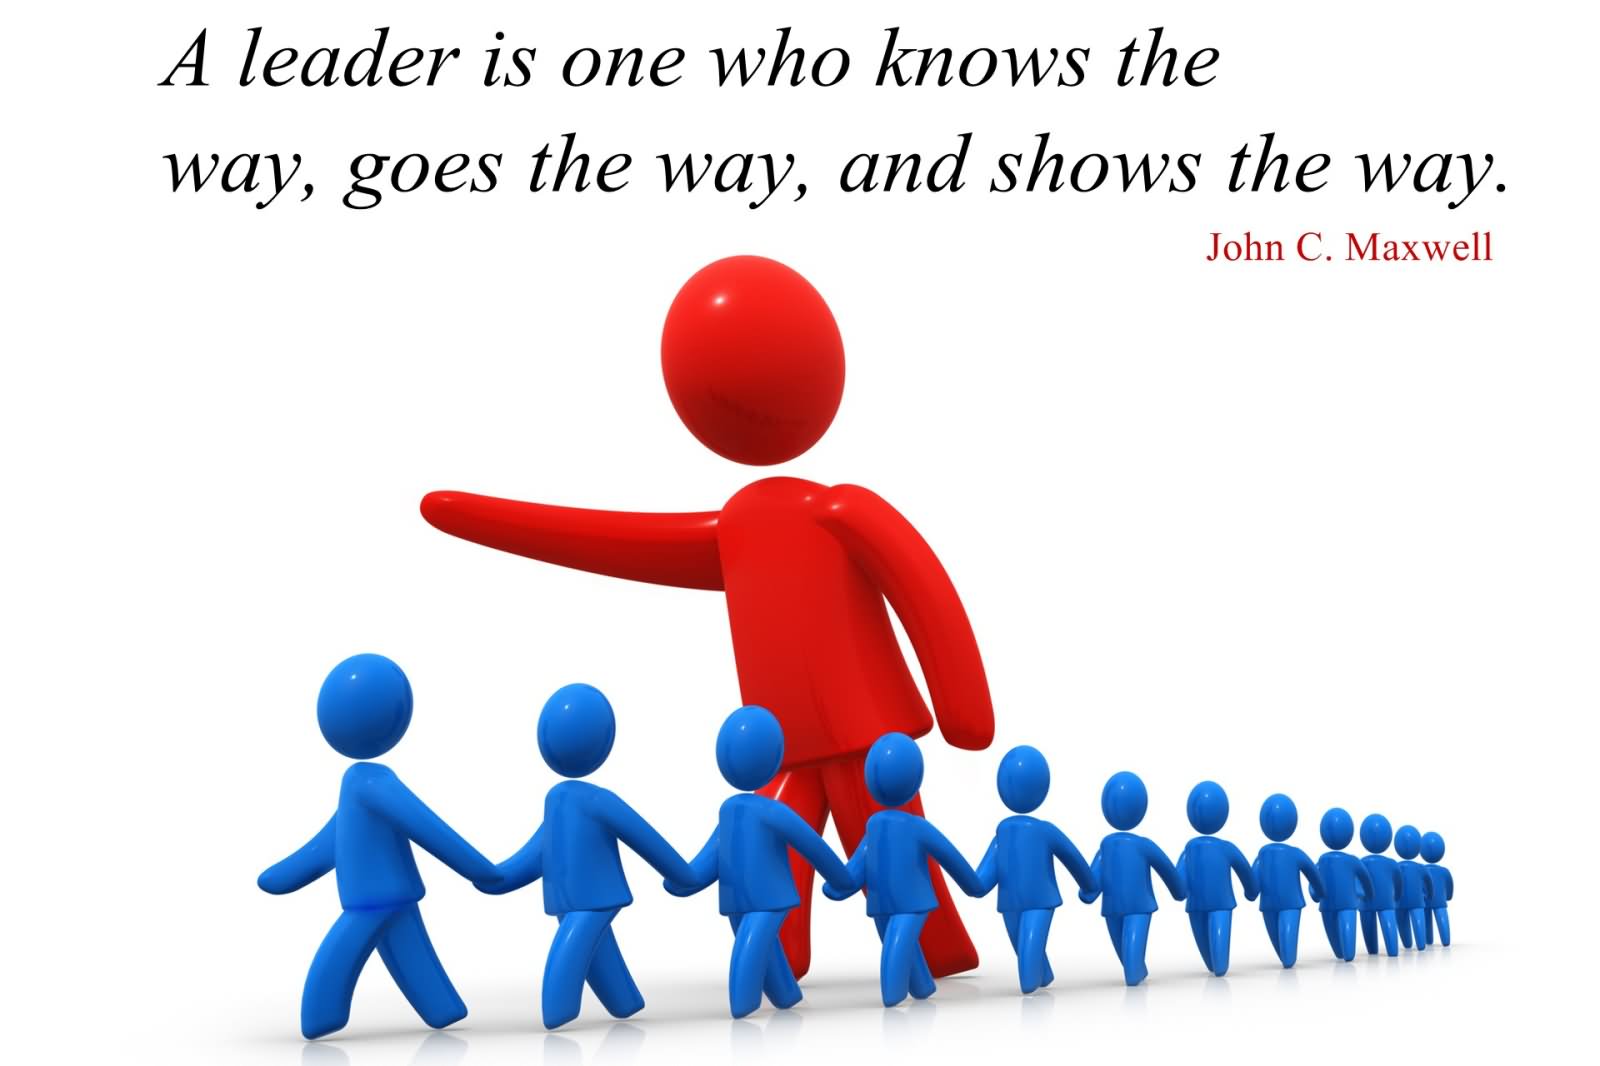 A leader is one who knows the way, goes the way and shows the way.